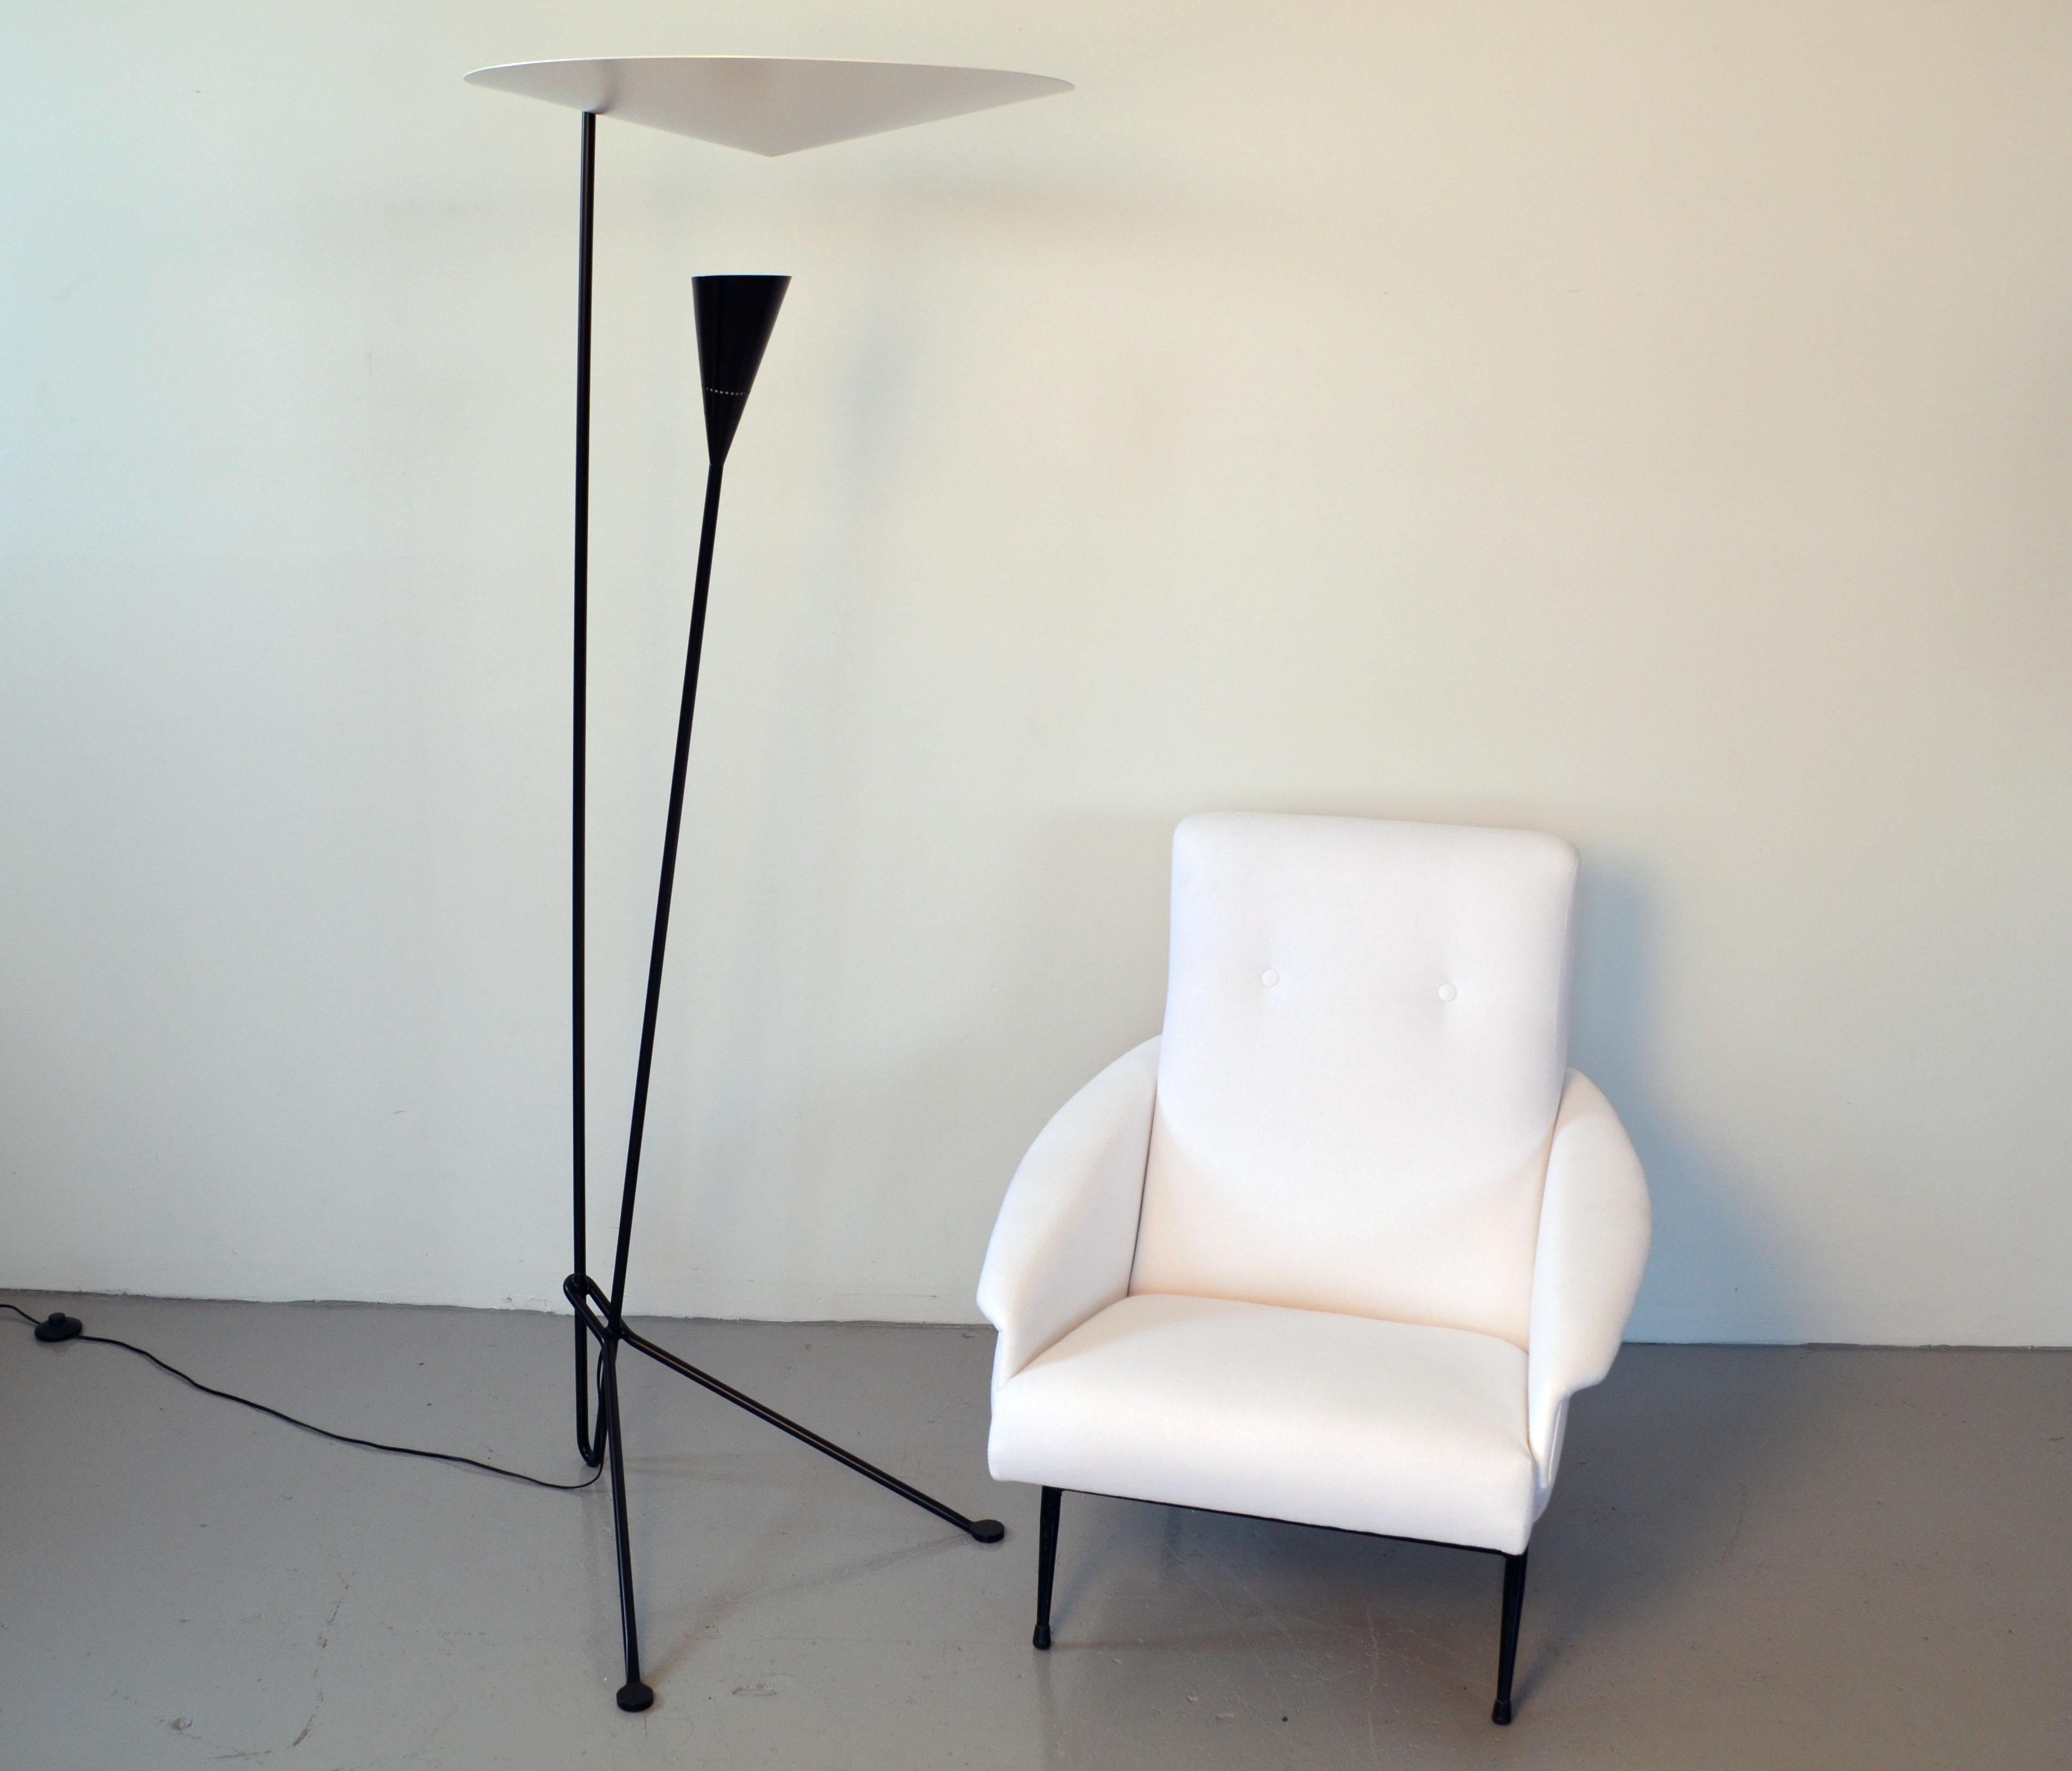 Michel Buffet - Black Standing Floor Lamp B211 - IN STOCK! In New Condition For Sale In Stratford, CT